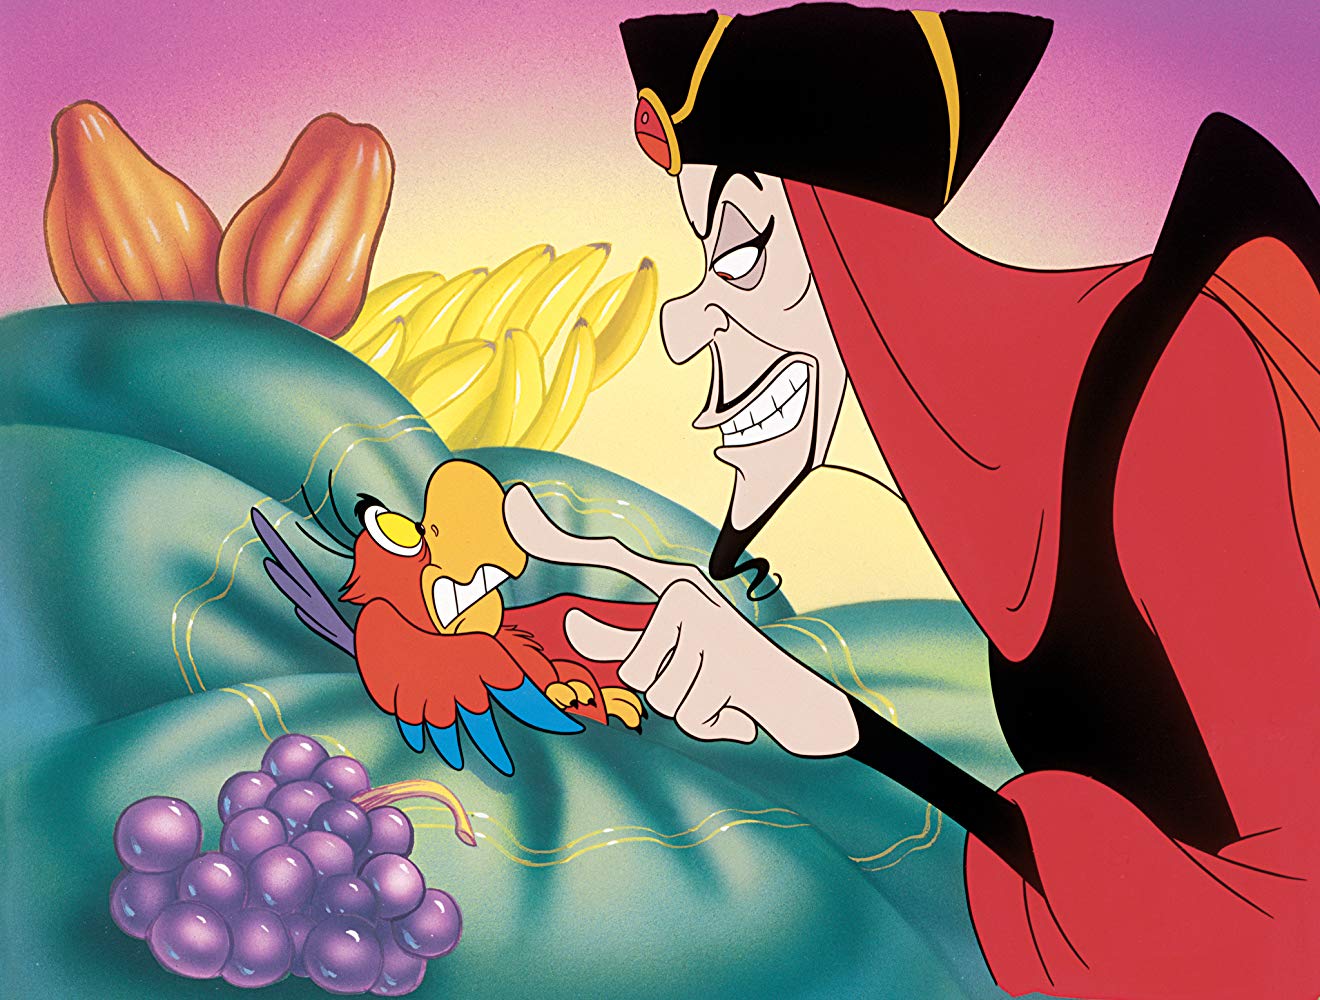 Jafar (voiced by Jonathan Freeman) and the parrot Iago (voiced by Gilbert Gottfried) back for more in The Return of Jafar (1994)